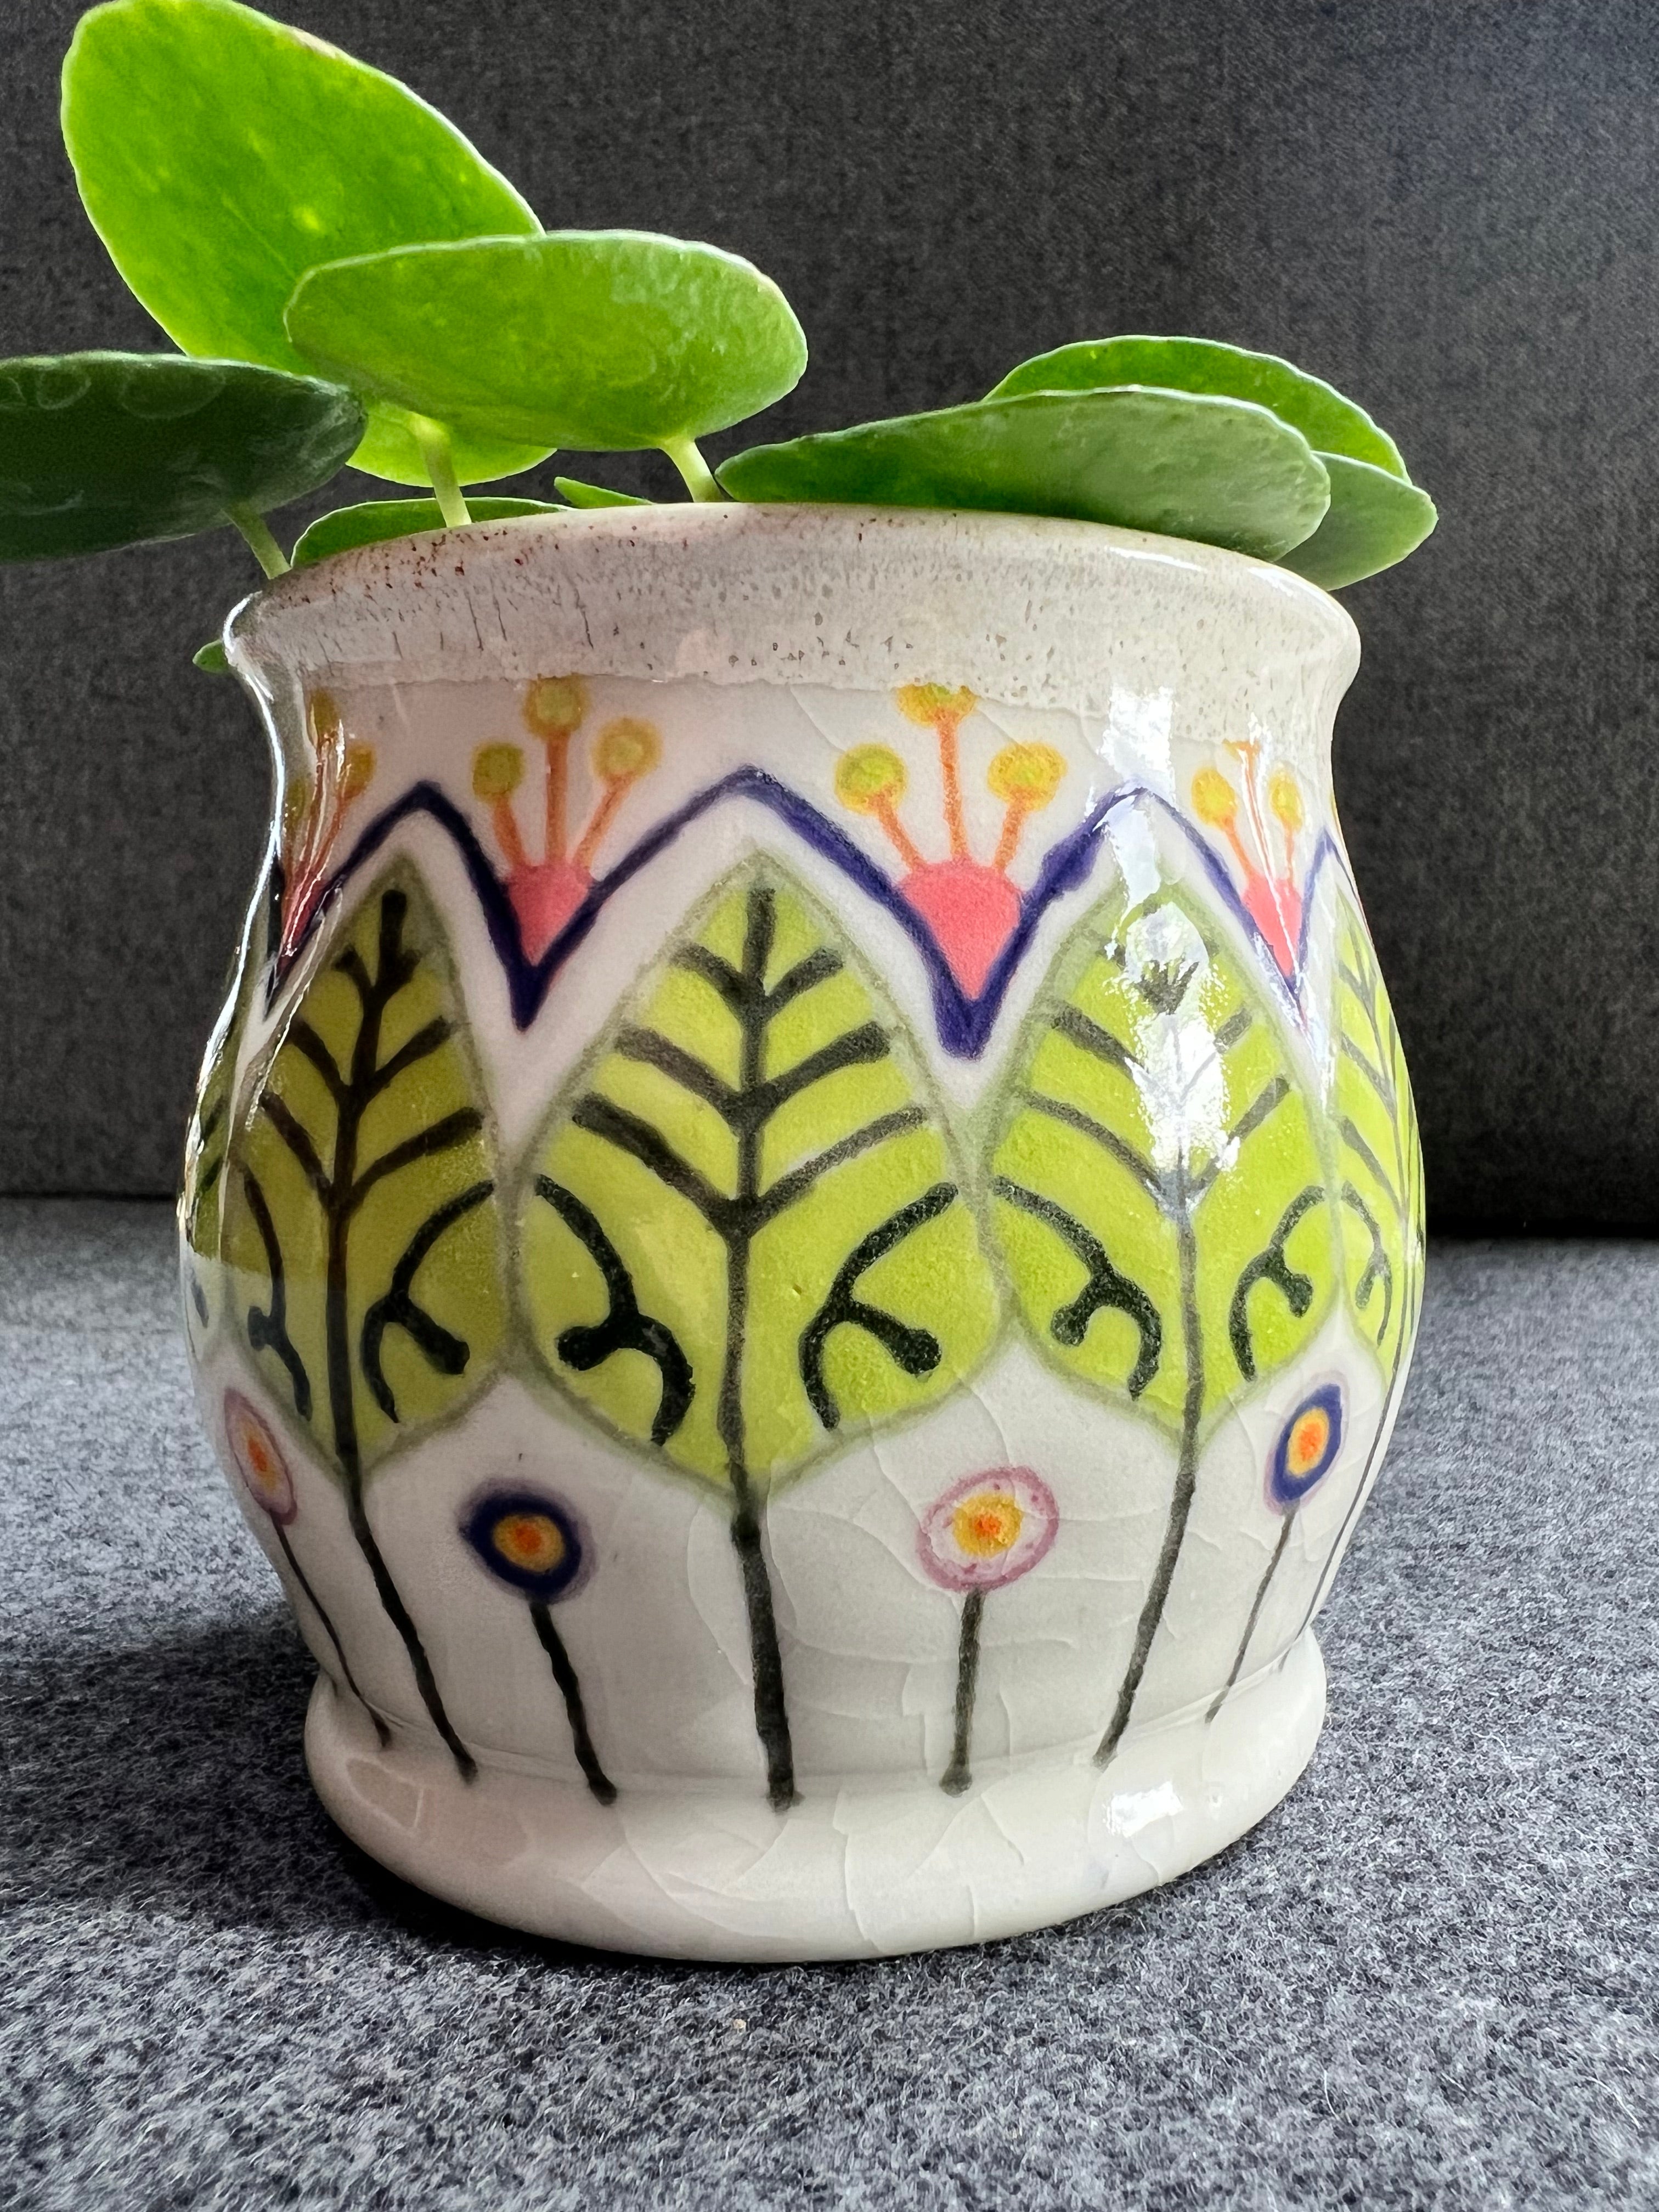 A white ceramic pot with green leaf pattern and circular abstract flowers holds a lush green plant.